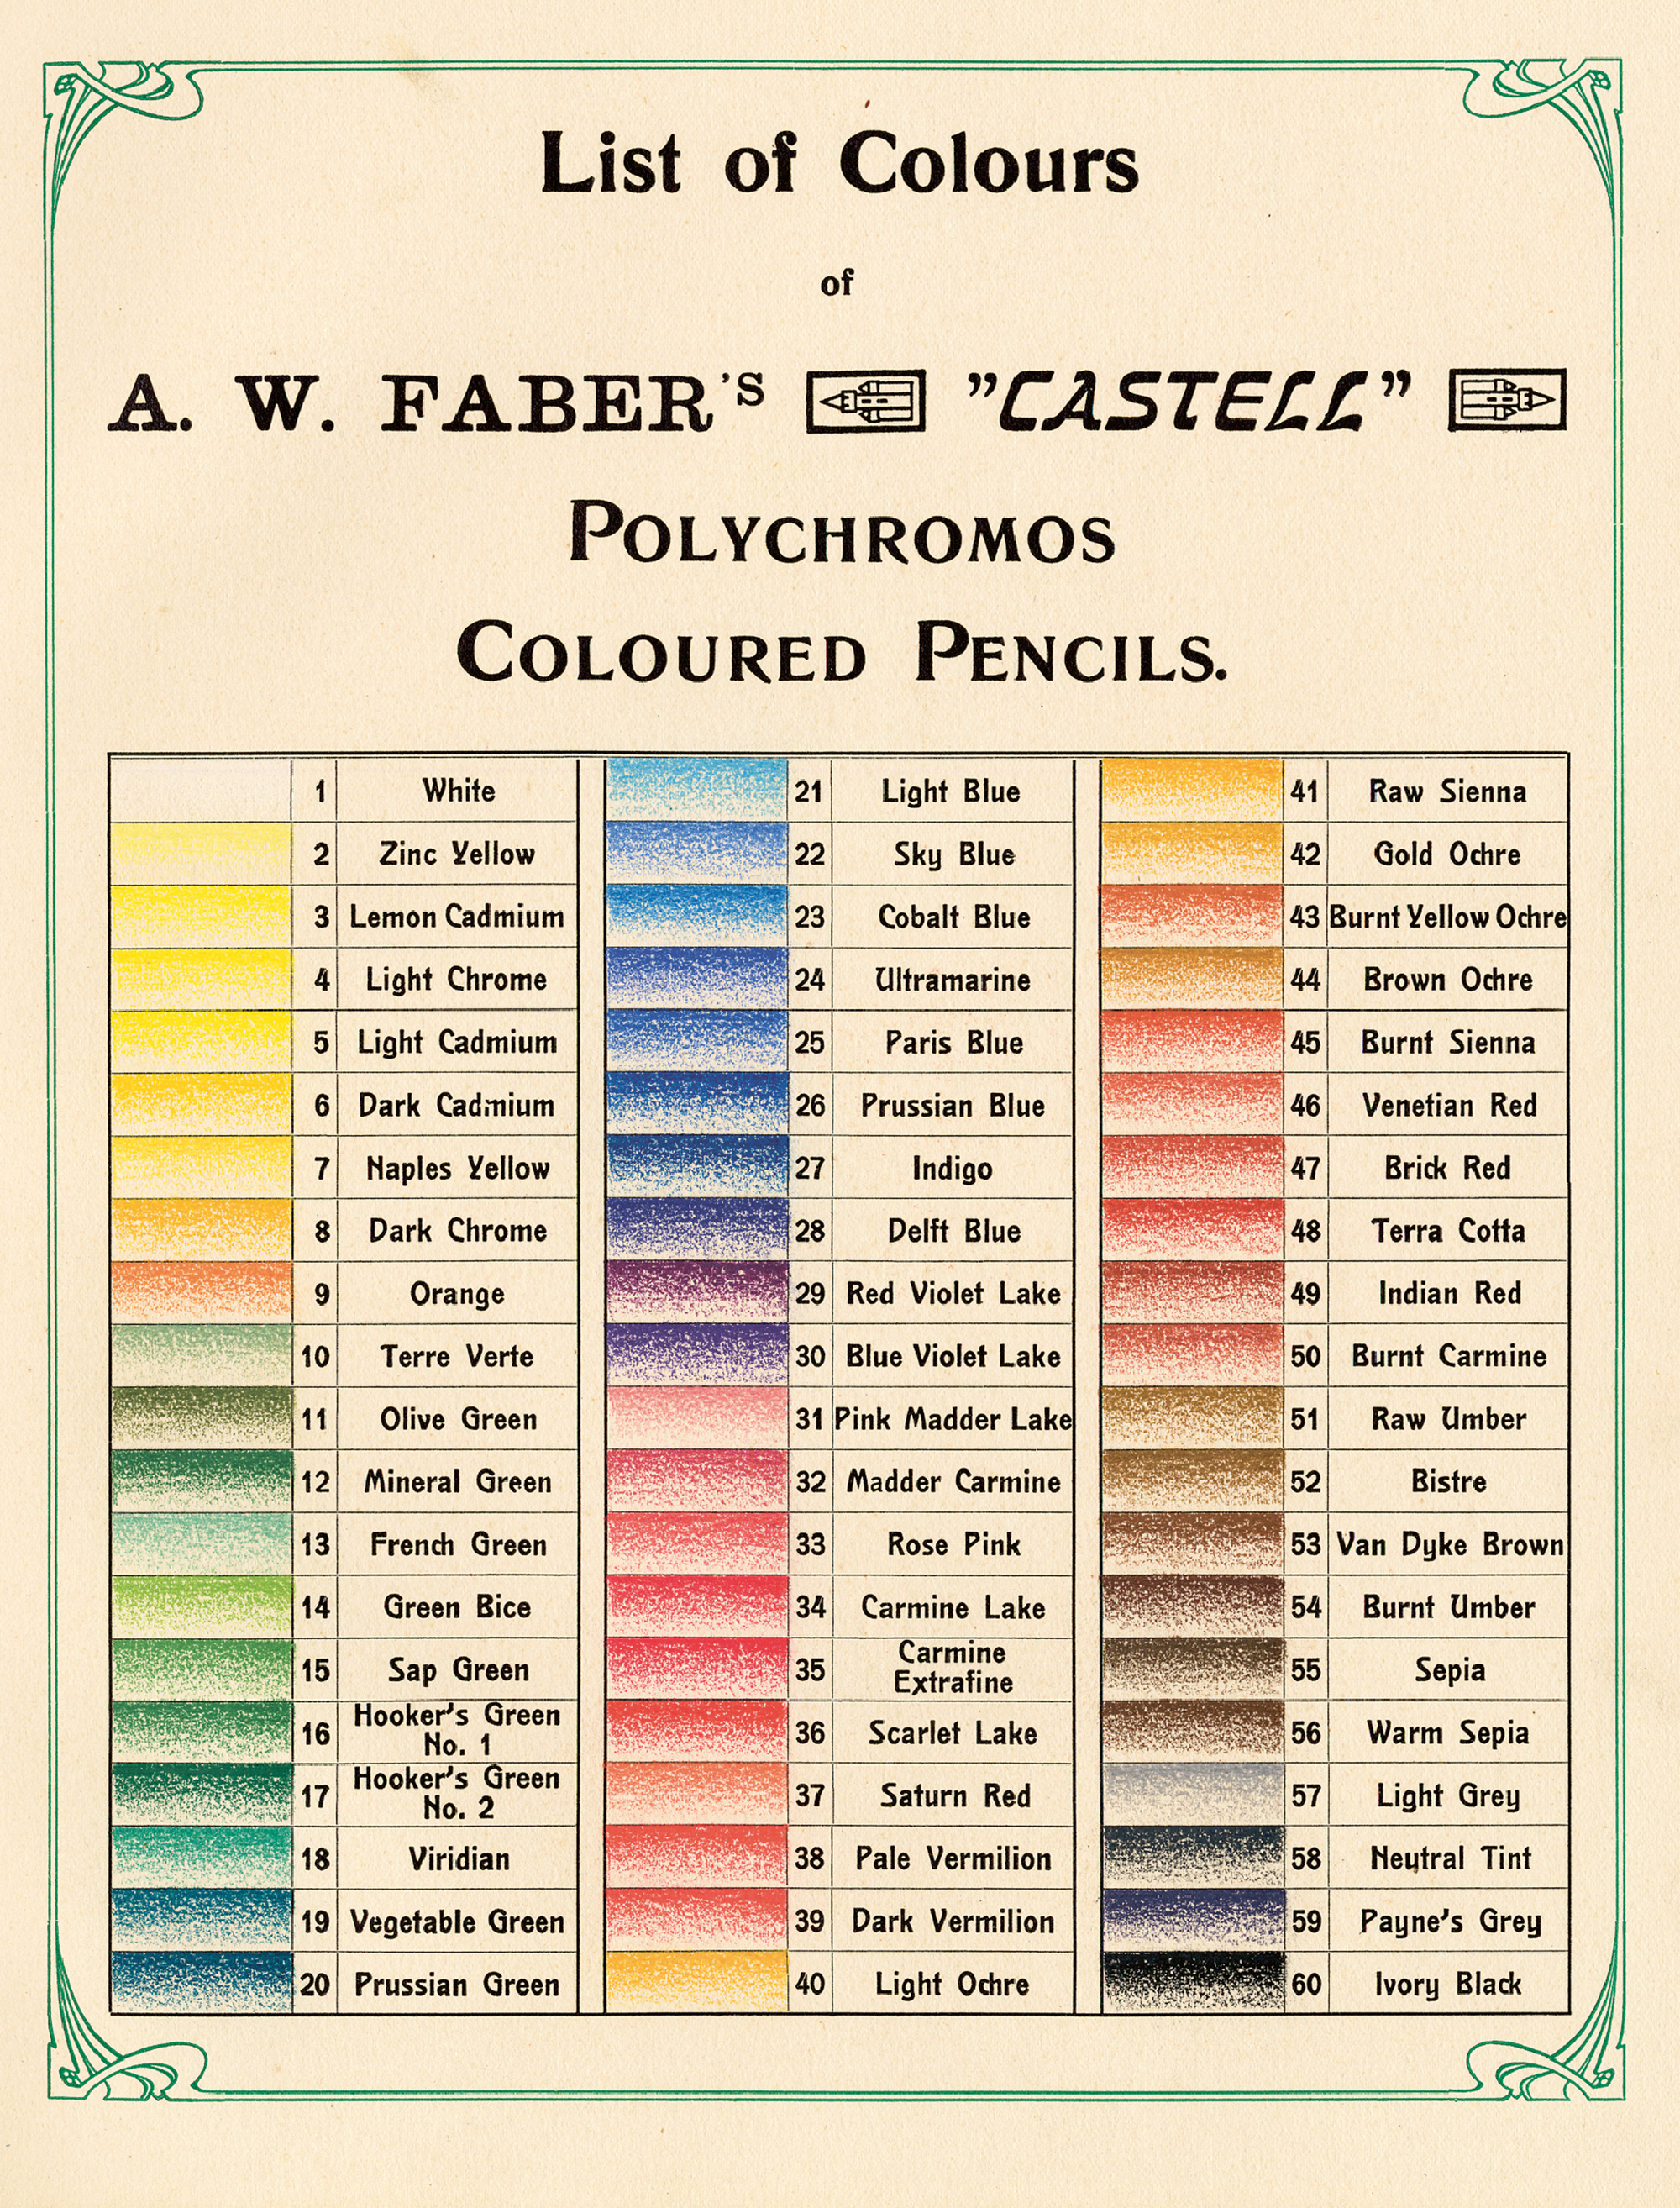 An A. W. Faber trade catalogue for lead and colored pencils from nineteen oh nine, listing two variations of Hooker’s green. The green was sold as a watercolor as early as eighteen thirty-two by the London firm of Winsor and Newton.